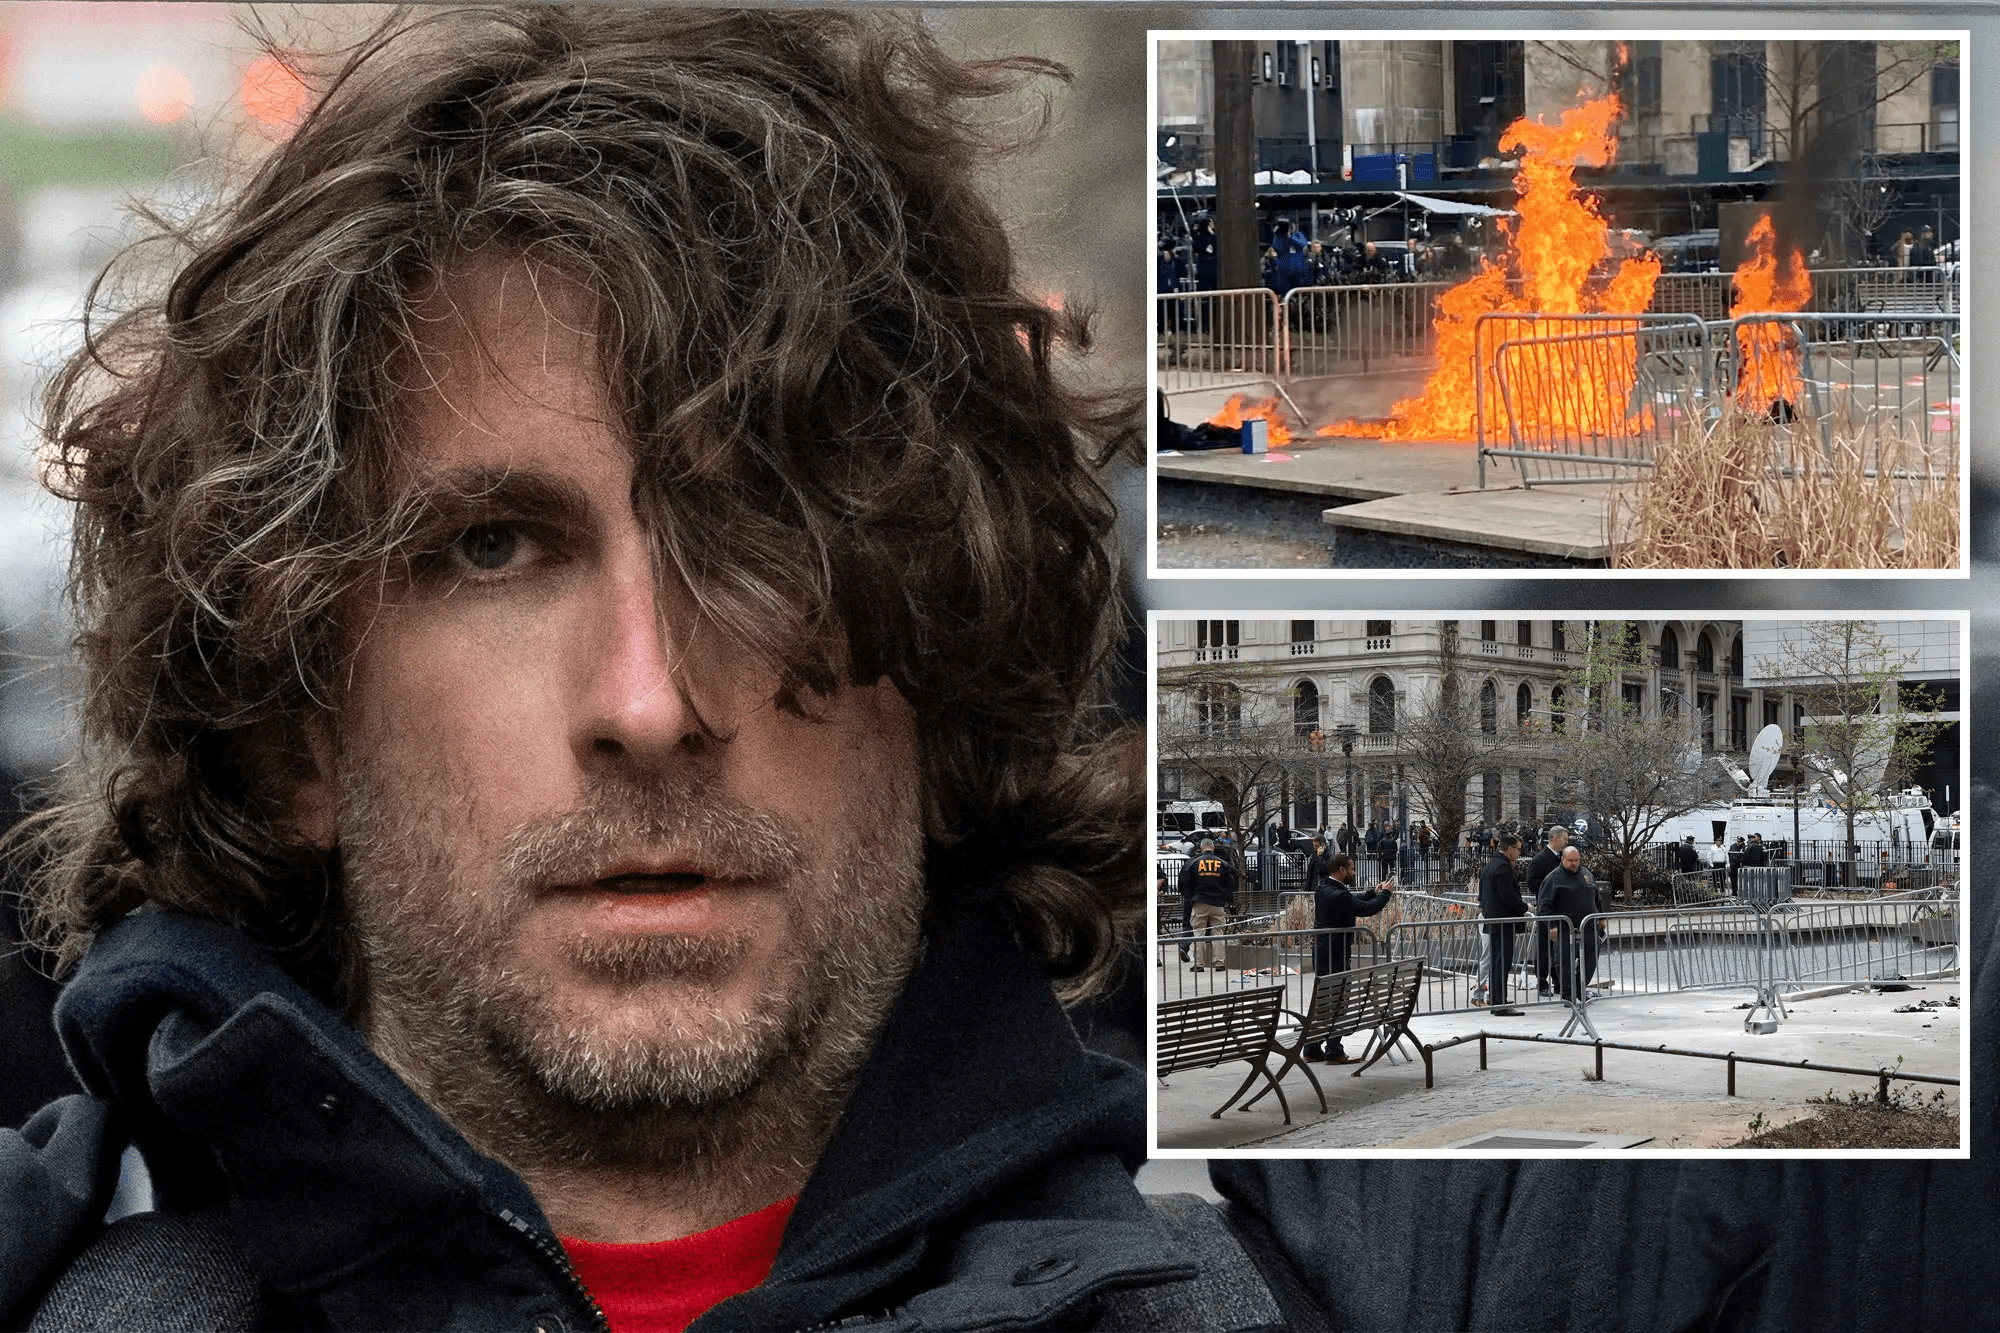 Man sets himself on fire during Trump trial